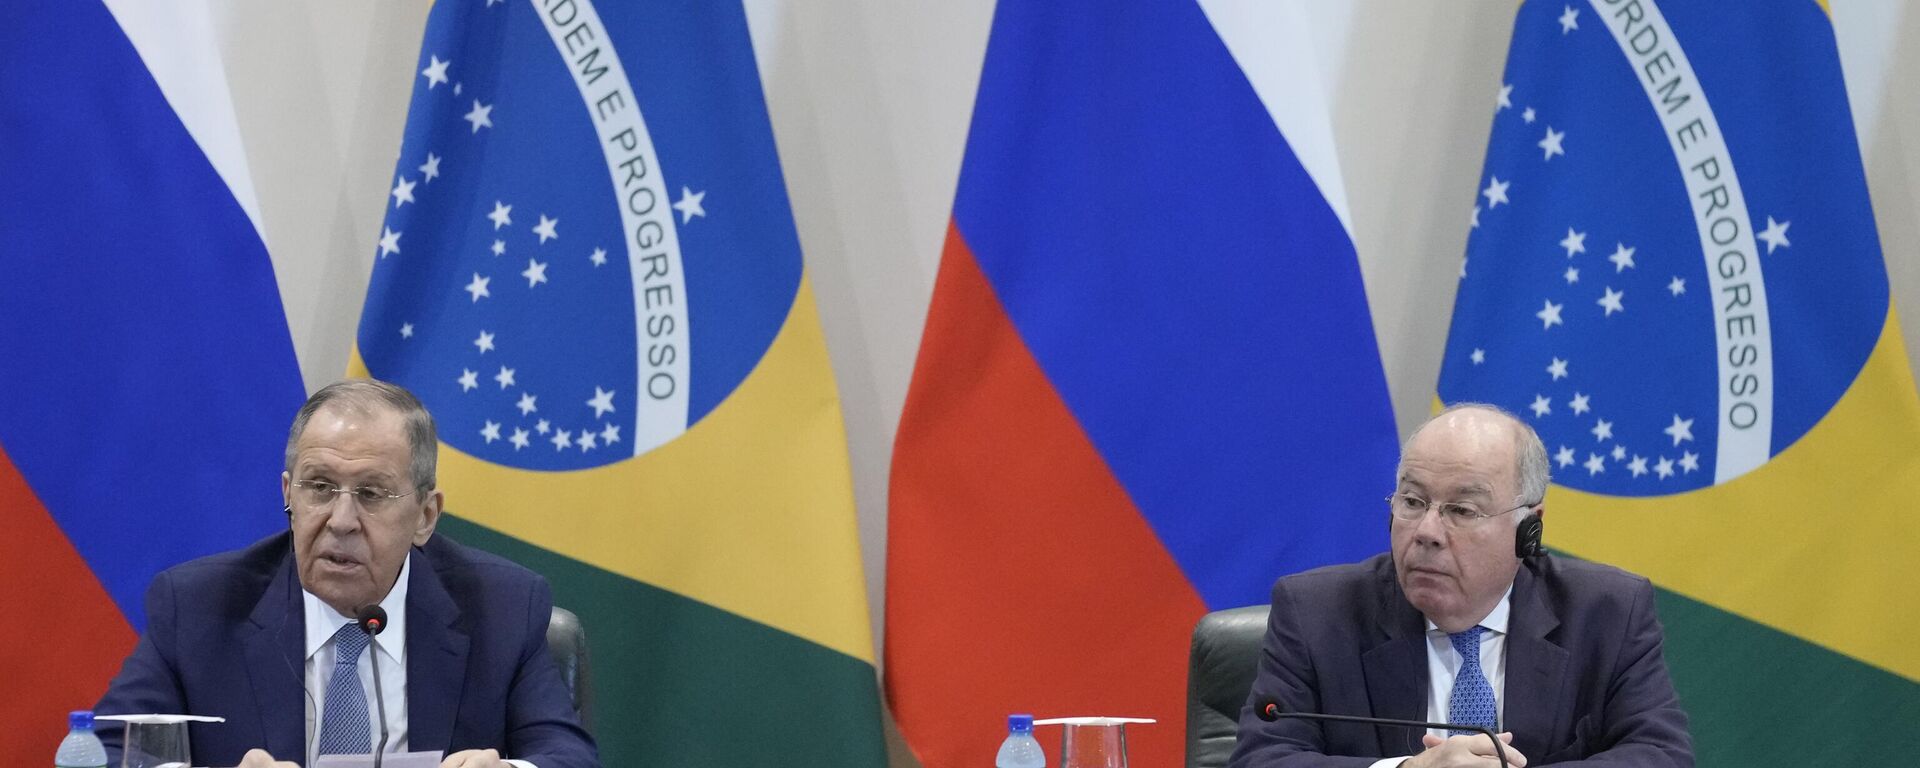 Russia's Foreign Minister Sergei Lavrov, left, and Brazilian Foreign Minister Mauro Vieira give a joint statement at Itamaraty Palace in Brasilia, Brazil, Monday, April 17, 2023. - Sputnik International, 1920, 17.04.2023